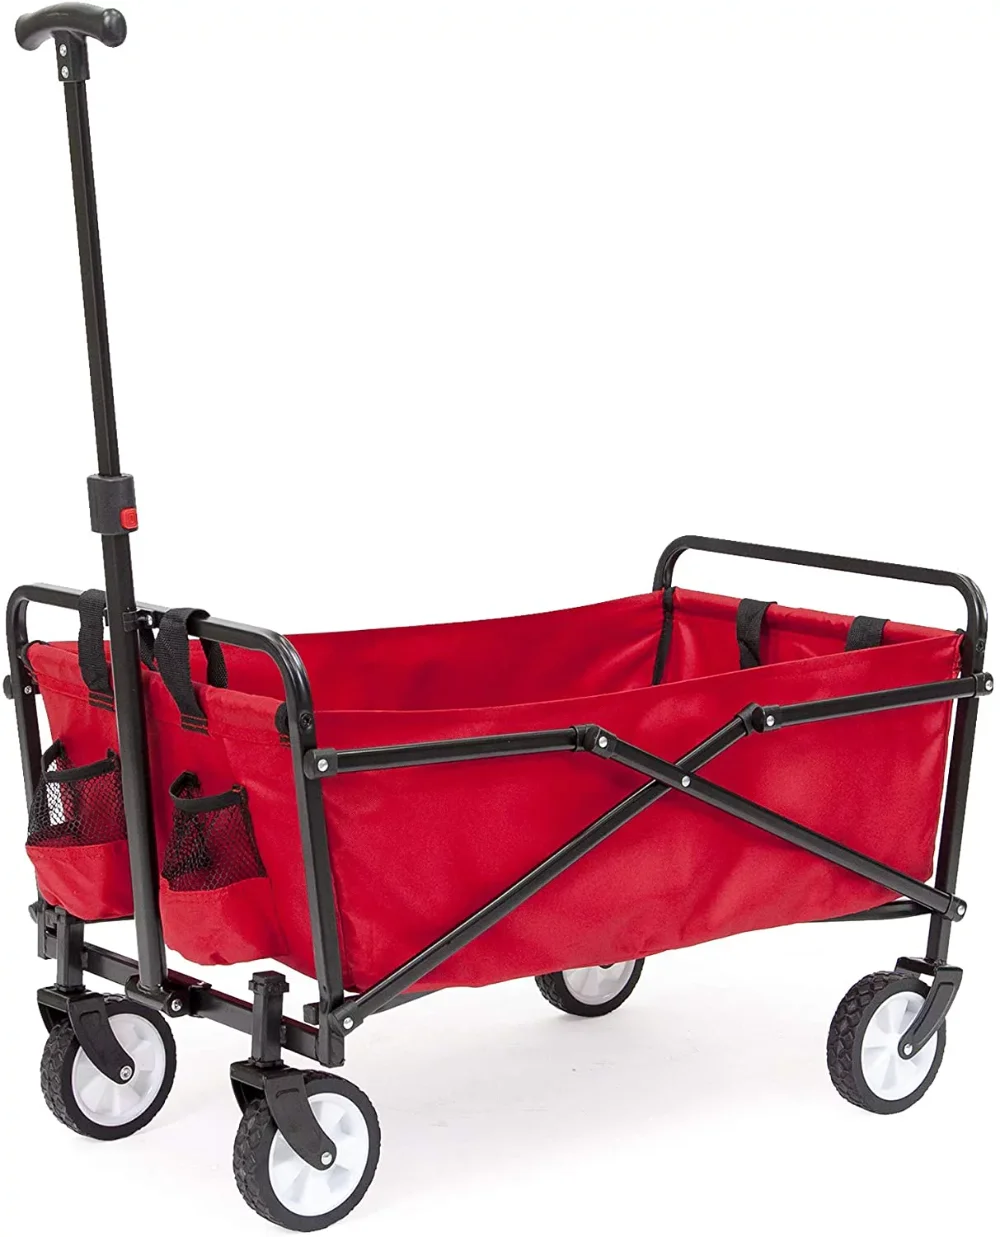 Seina Collapsible Folding Wagon with Straps | Utility Cart, Portable, Lightweight, Fold up, for Groceries, Laundry, Sports